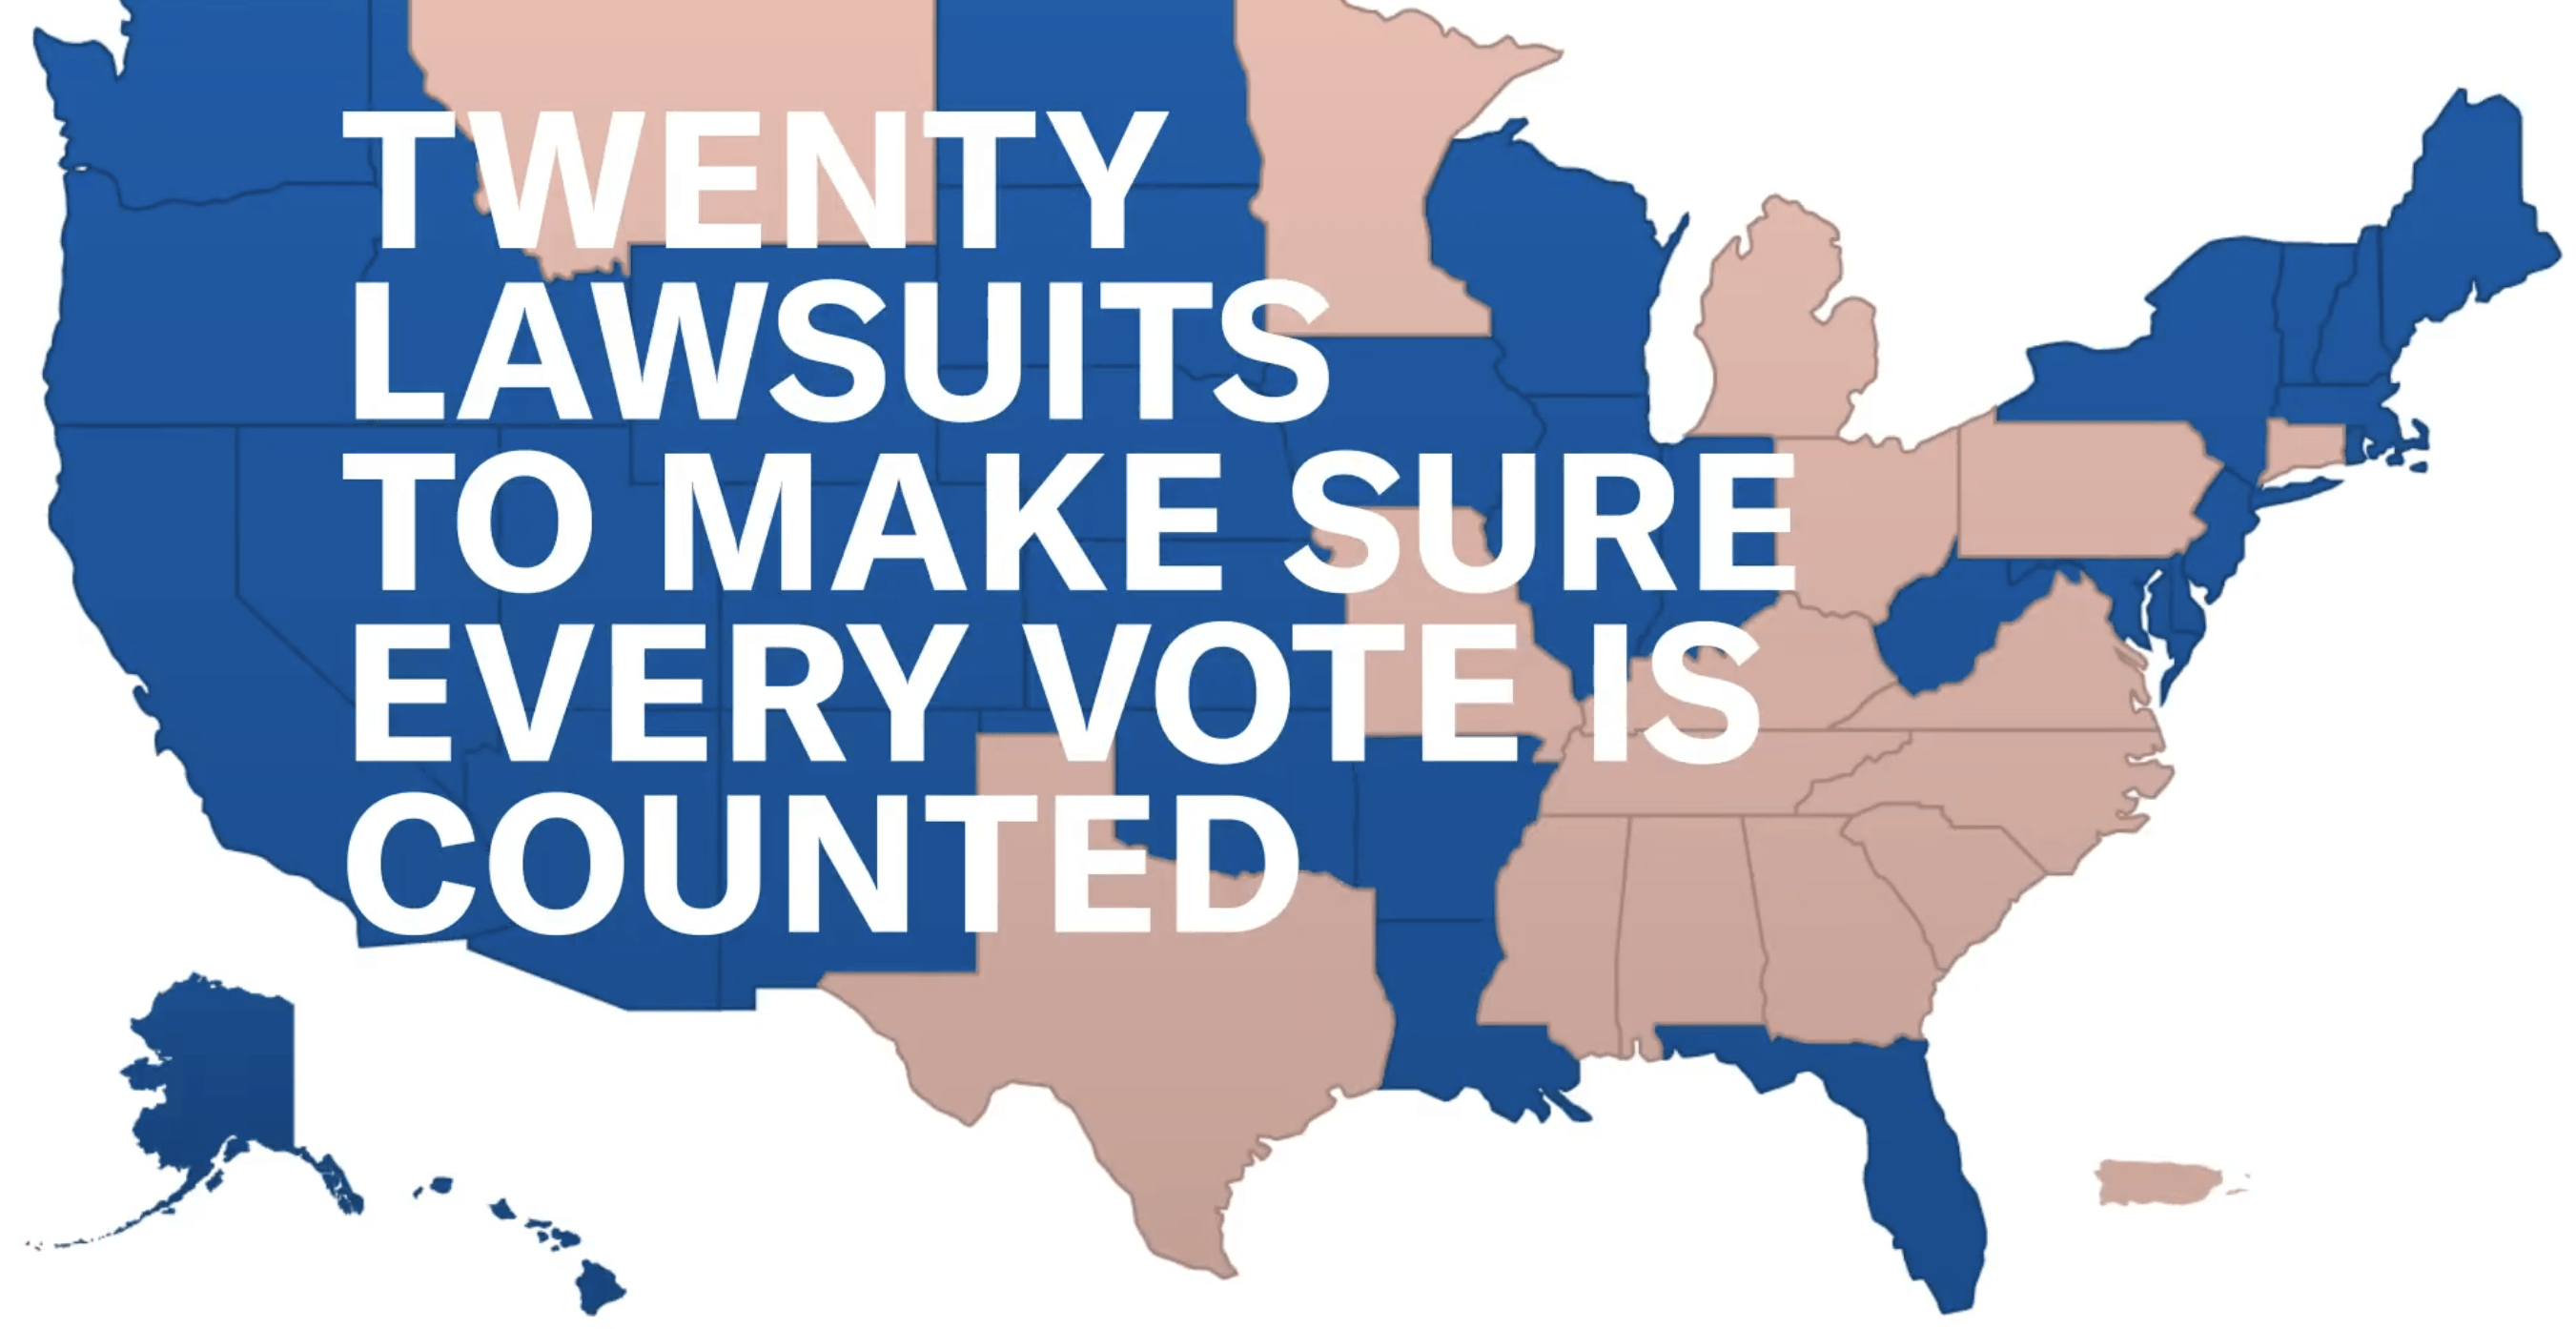 Aclu Launches Ad Campaign To Promote The Right To Vote News And Guts Media 1236